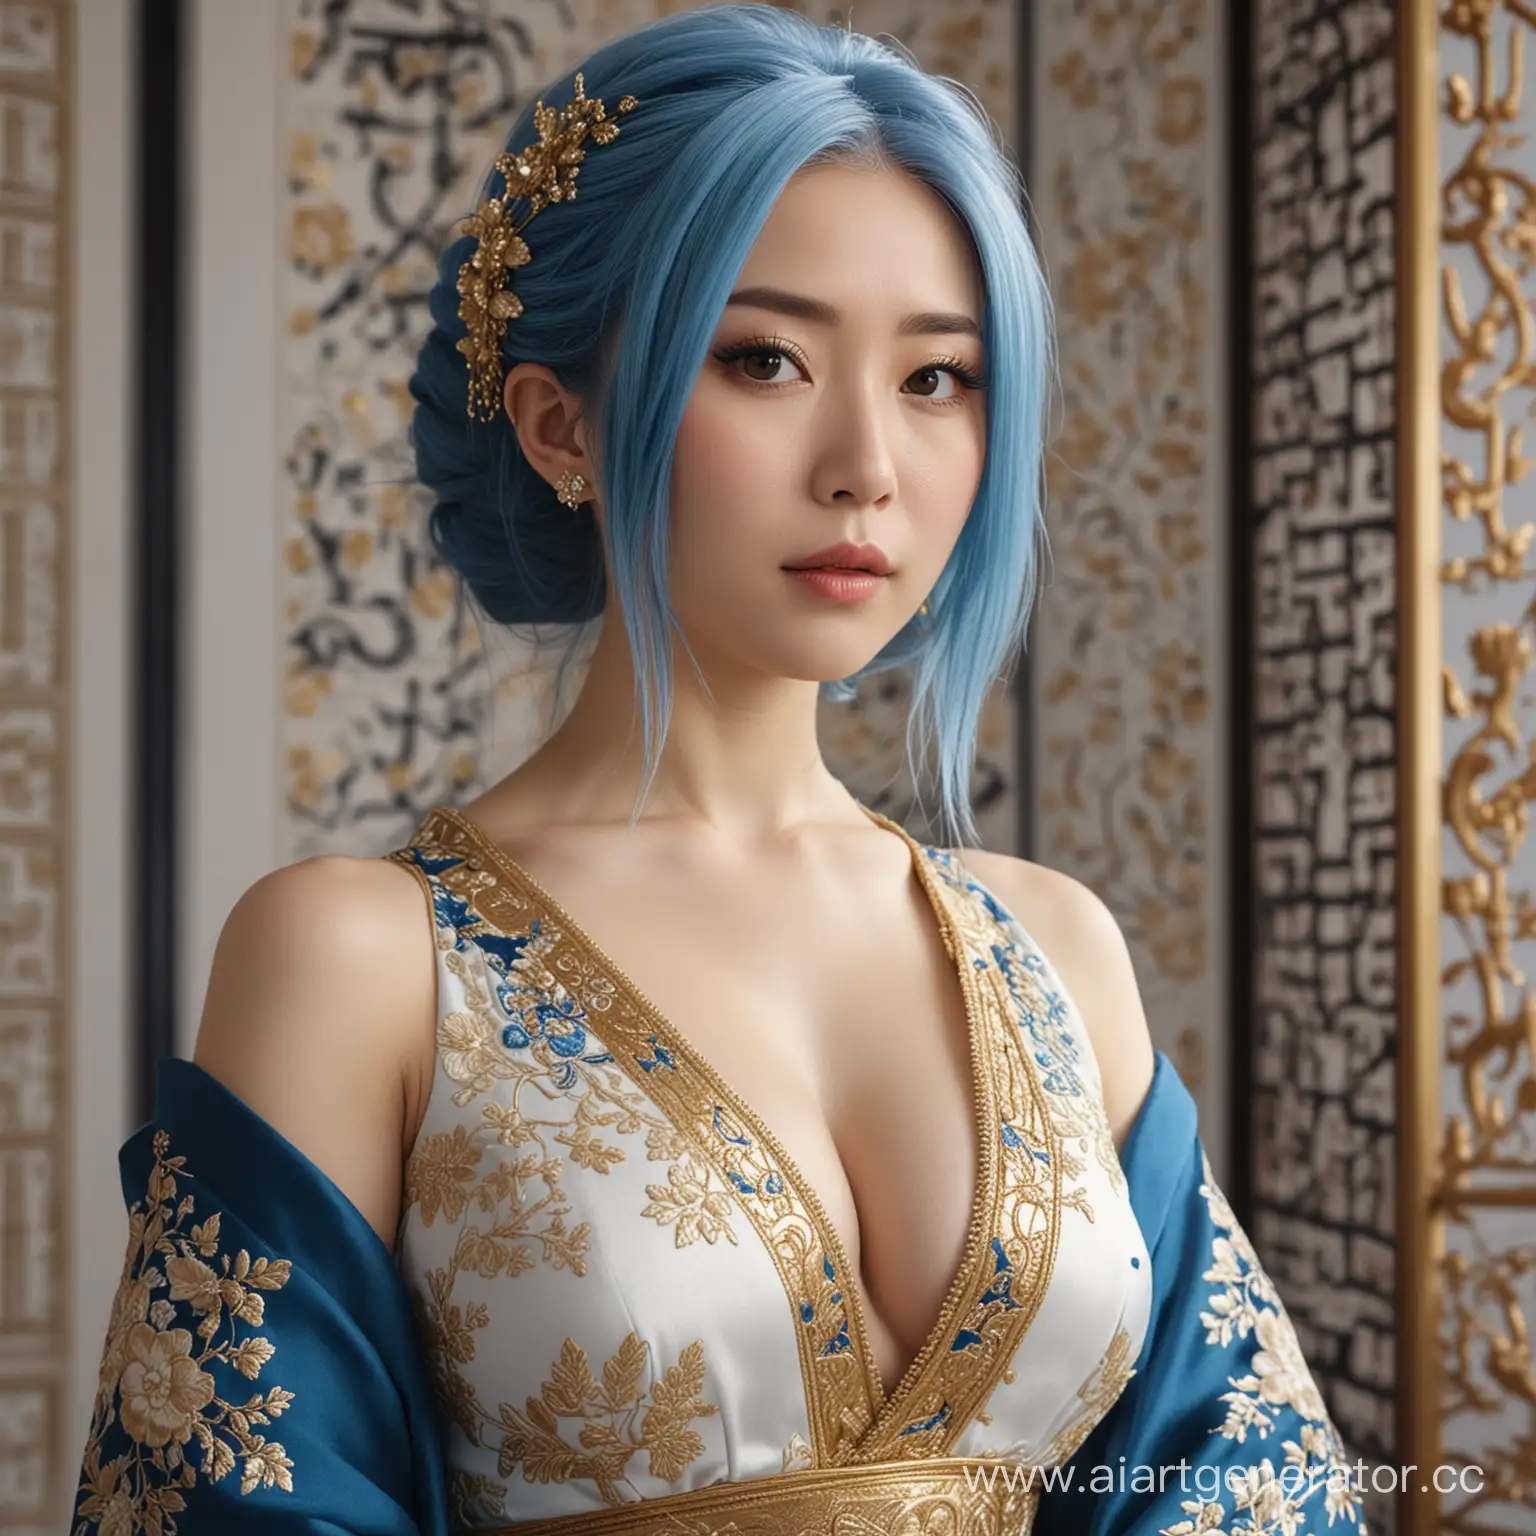 An elegant woman with a Japanese dress, blue hair, white skin, cleavage. She is posing. Her outfit is adorned with gold embroidery. A masterpiece in 8K ultra.